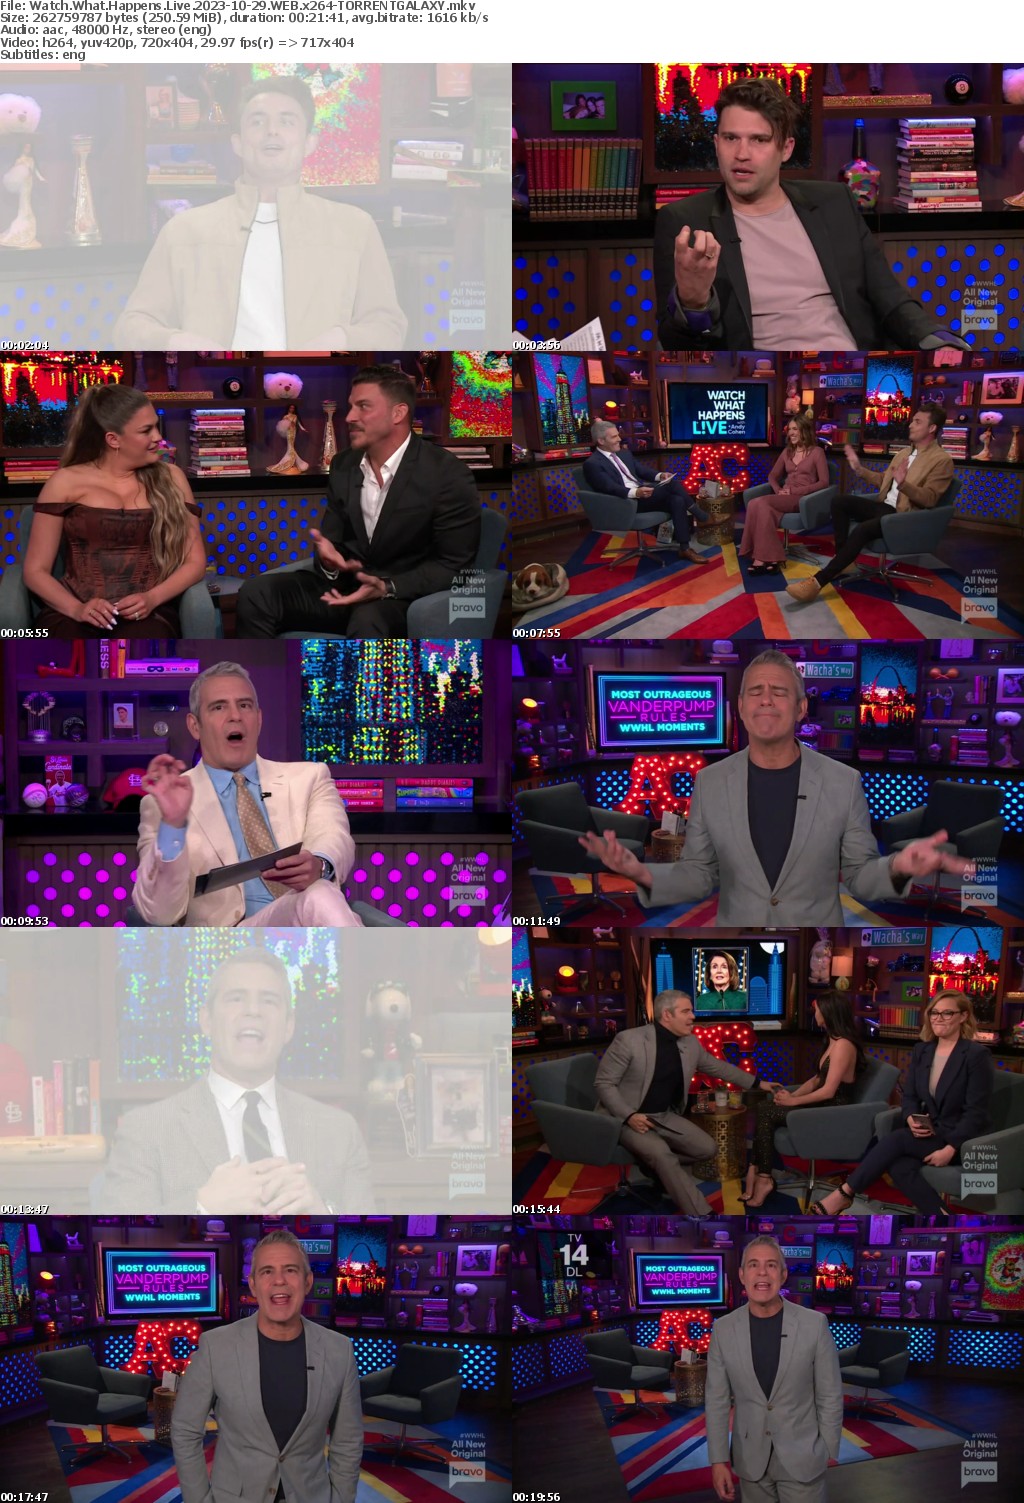 Watch What Happens Live 2023-10-29 WEB x264-GALAXY